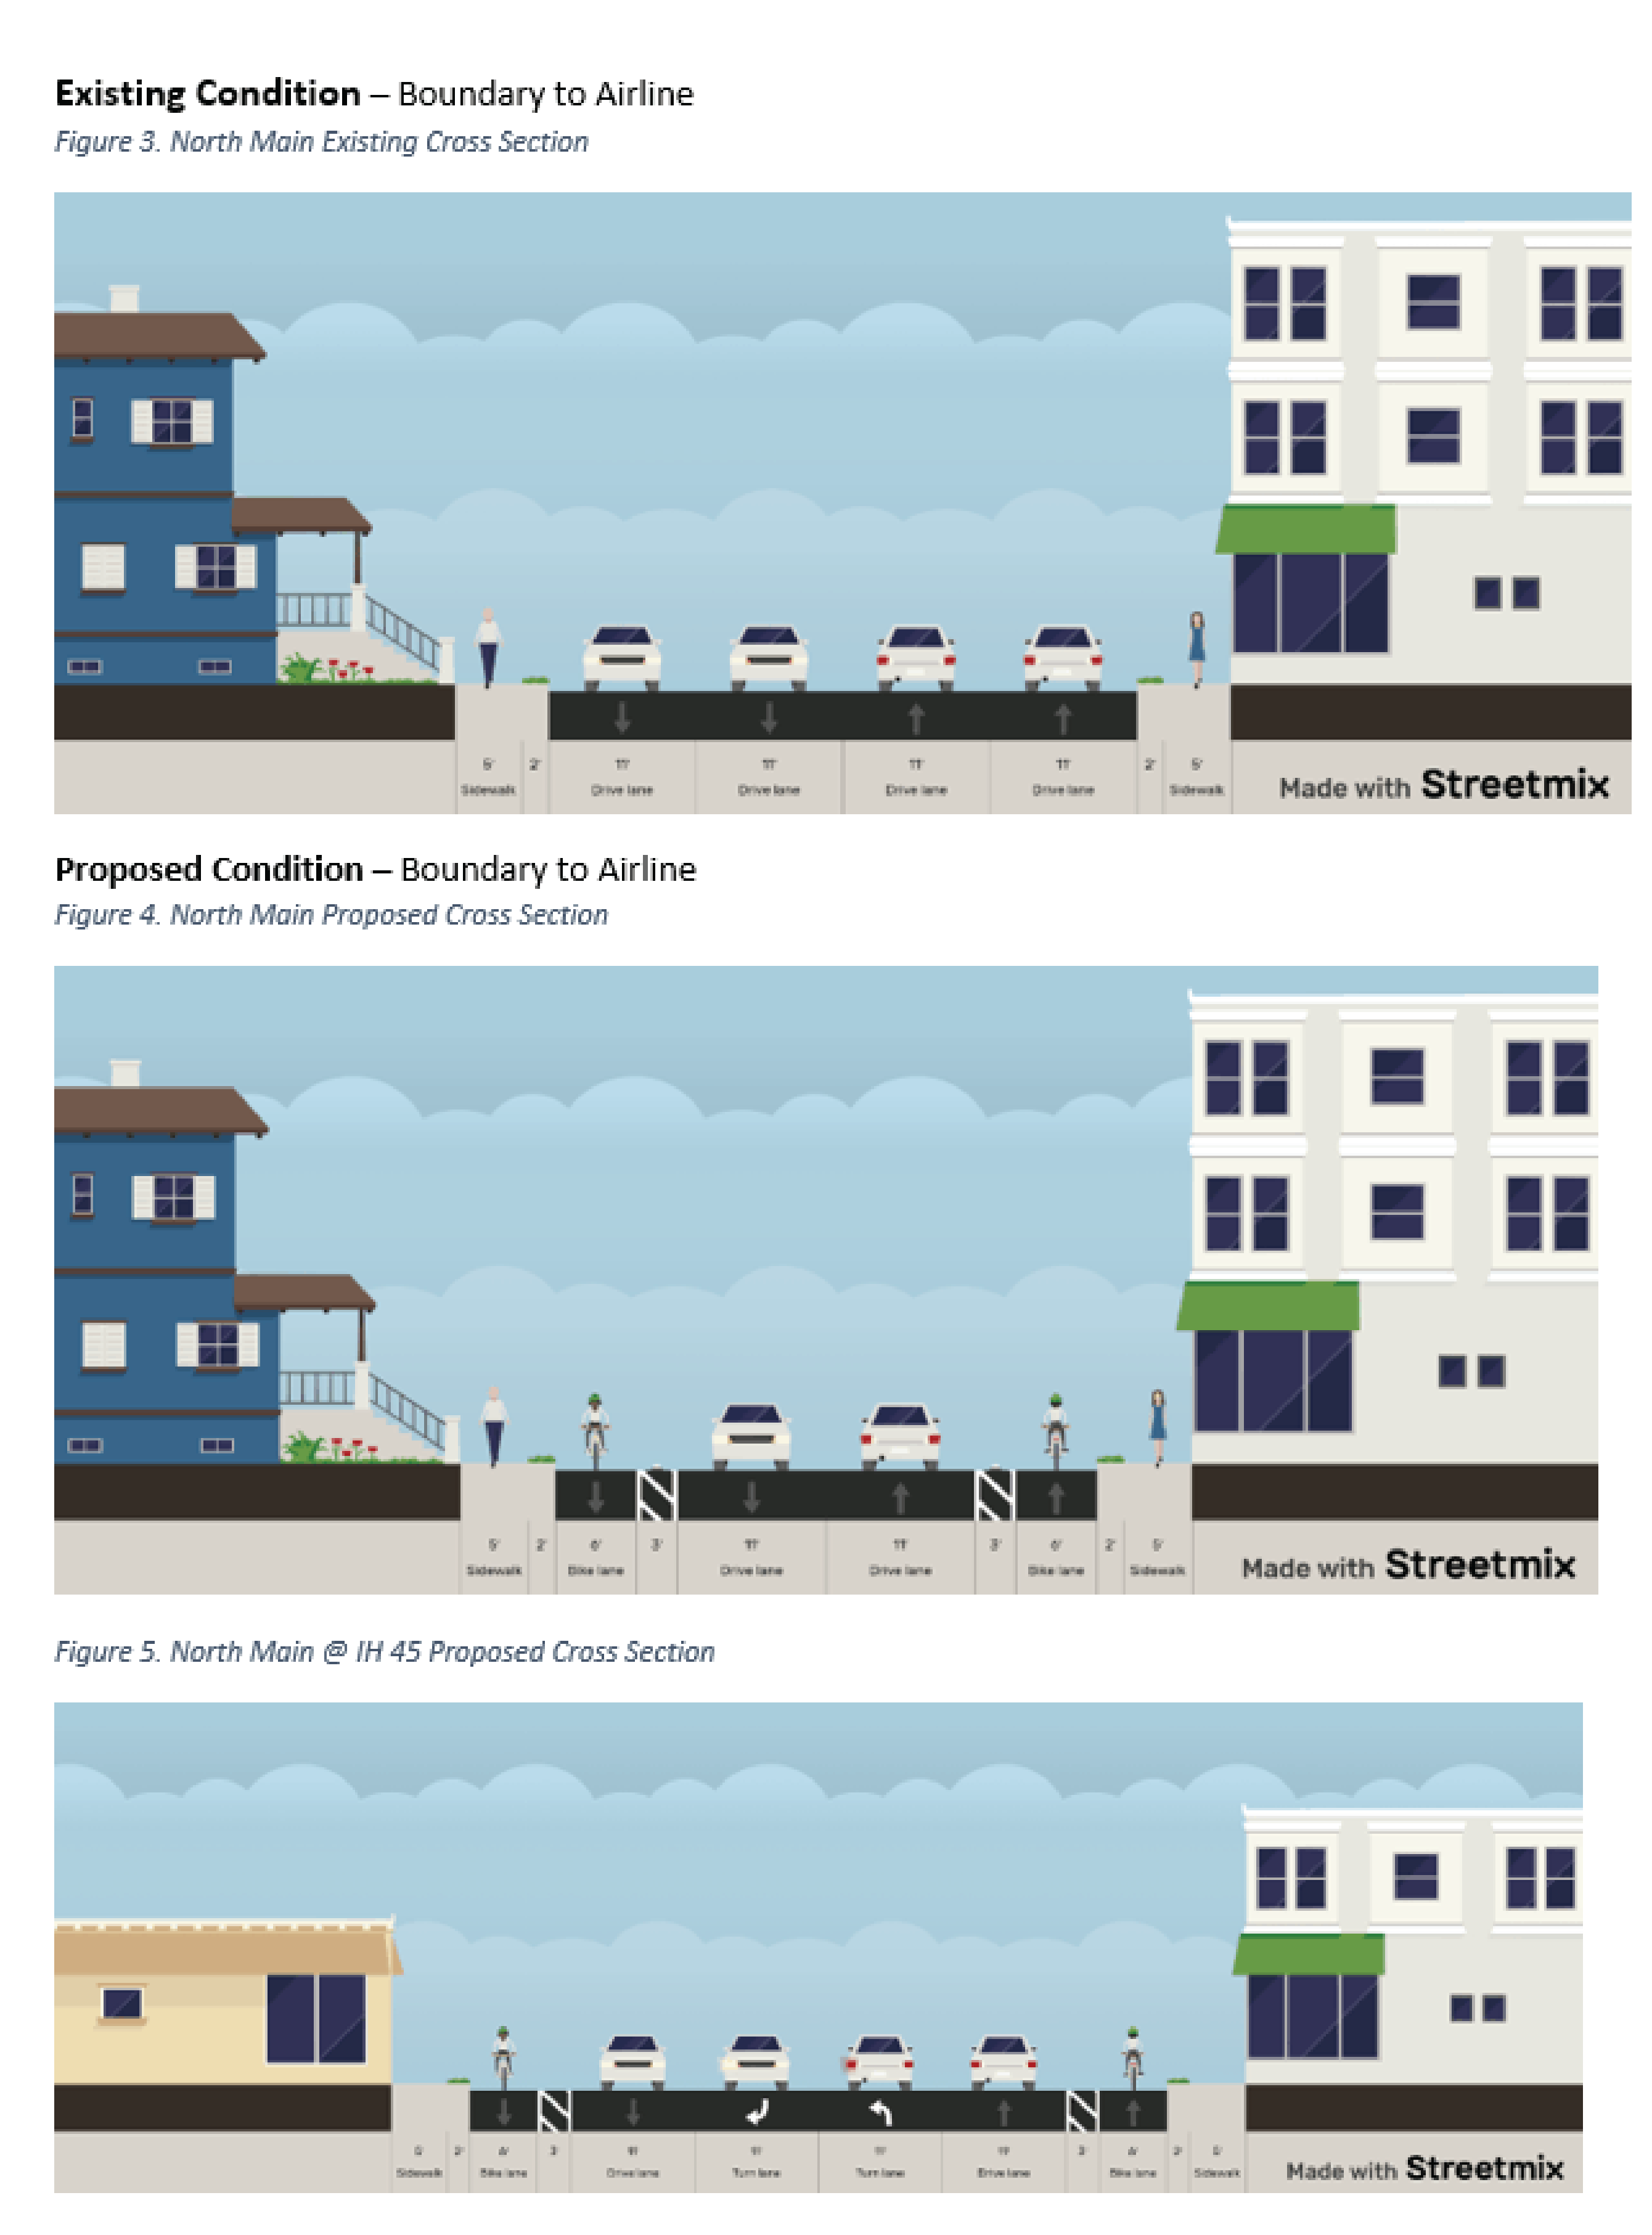 North Main existing conditions: four-lane undivided roadway. North Main proposed conditions: two lanes with protected bike lanes.